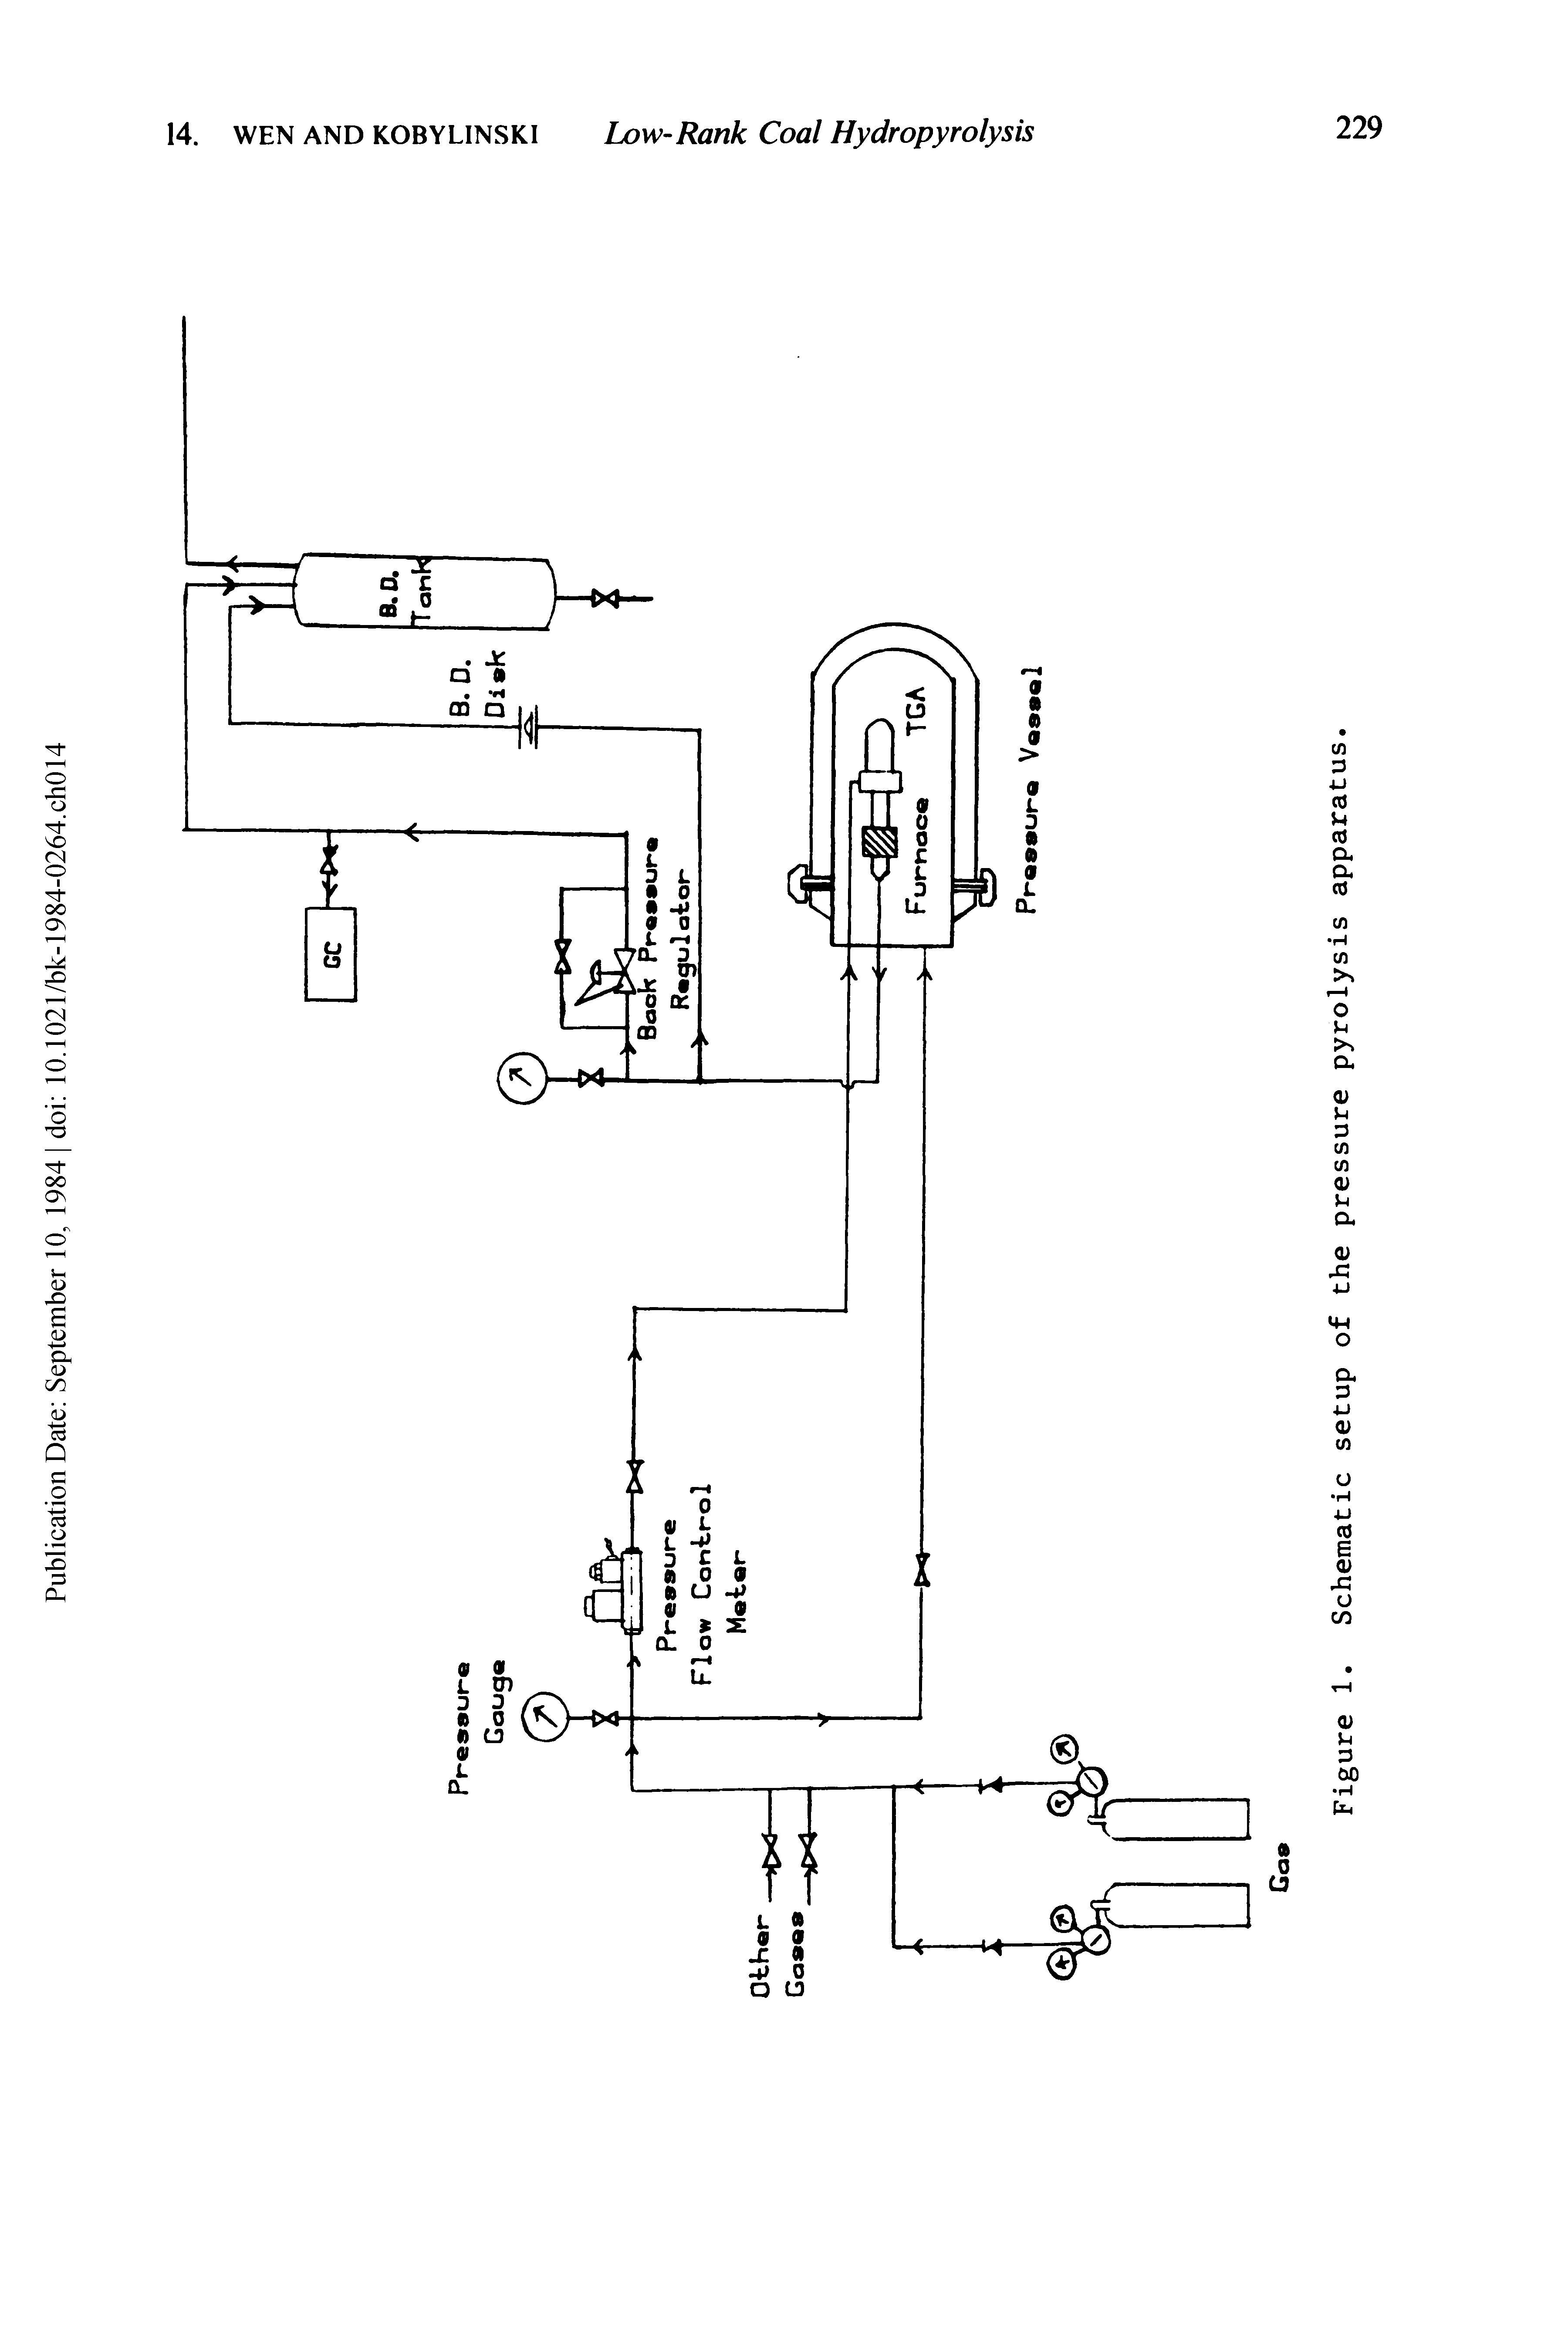 Figure 1. Schematic setup of the pressure pyrolysis apparatus.